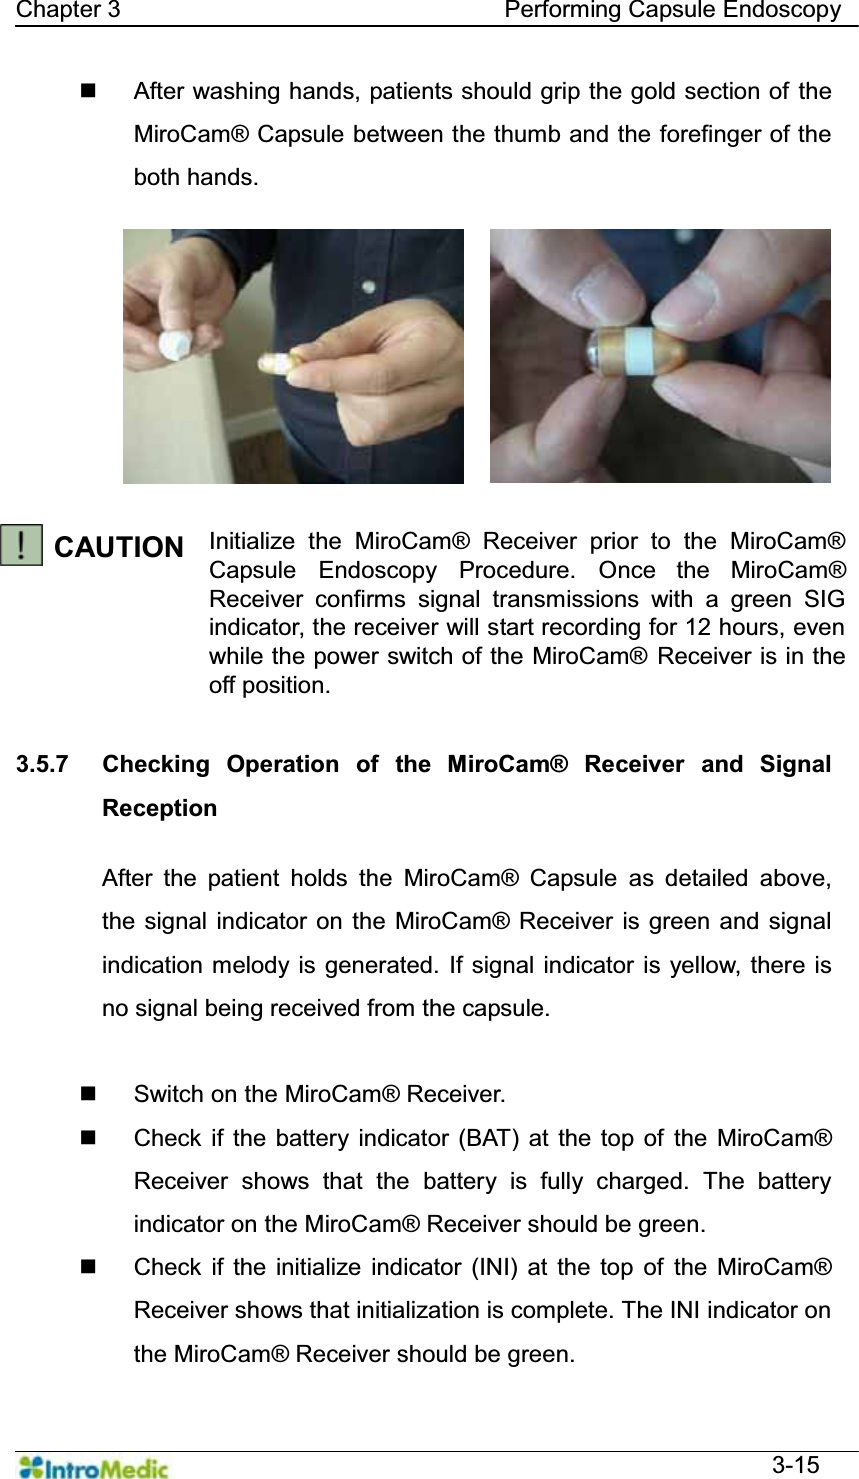   Chapter 3                                Performing Capsule Endoscopy  3-15   After washing hands, patients should grip the gold section of the MiroCam® Capsule between the thumb and the forefinger of the both hands.   CAUTION Initialize the MiroCam® Receiver prior to the MiroCam® Capsule Endoscopy Procedure. Once the MiroCam® Receiver confirms signal transmissions with a green SIG indicator, the receiver will start recording for 12 hours, even while the power switch of the MiroCam® Receiver is in the off position.  3.5.7  Checking Operation of the MiroCam® Receiver and Signal Reception  After the patient holds the MiroCam® Capsule as detailed above, the signal indicator on the MiroCam® Receiver is green and signal indication melody is generated. If signal indicator is yellow, there is no signal being received from the capsule.    Switch on the MiroCam® Receiver.   Check if the battery indicator (BAT) at the top of the MiroCam® Receiver shows that the battery is fully charged. The battery indicator on the MiroCam® Receiver should be green.   Check if the initialize indicator (INI) at the top of the MiroCam® Receiver shows that initialization is complete. The INI indicator on the MiroCam® Receiver should be green. 